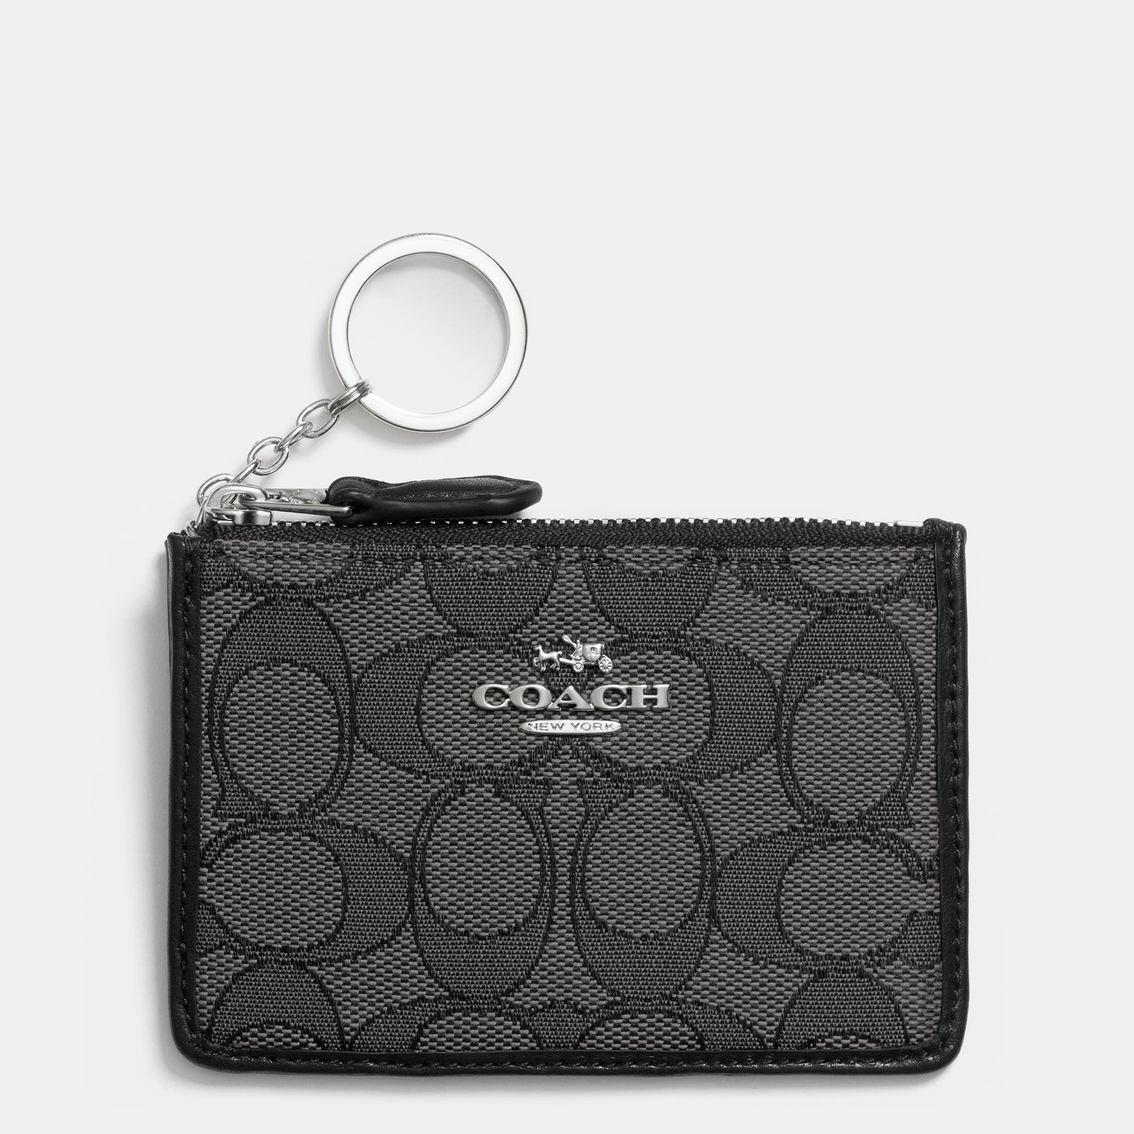 Coach Mini Skinny Id Case | Personal Accessories | Clothing ...